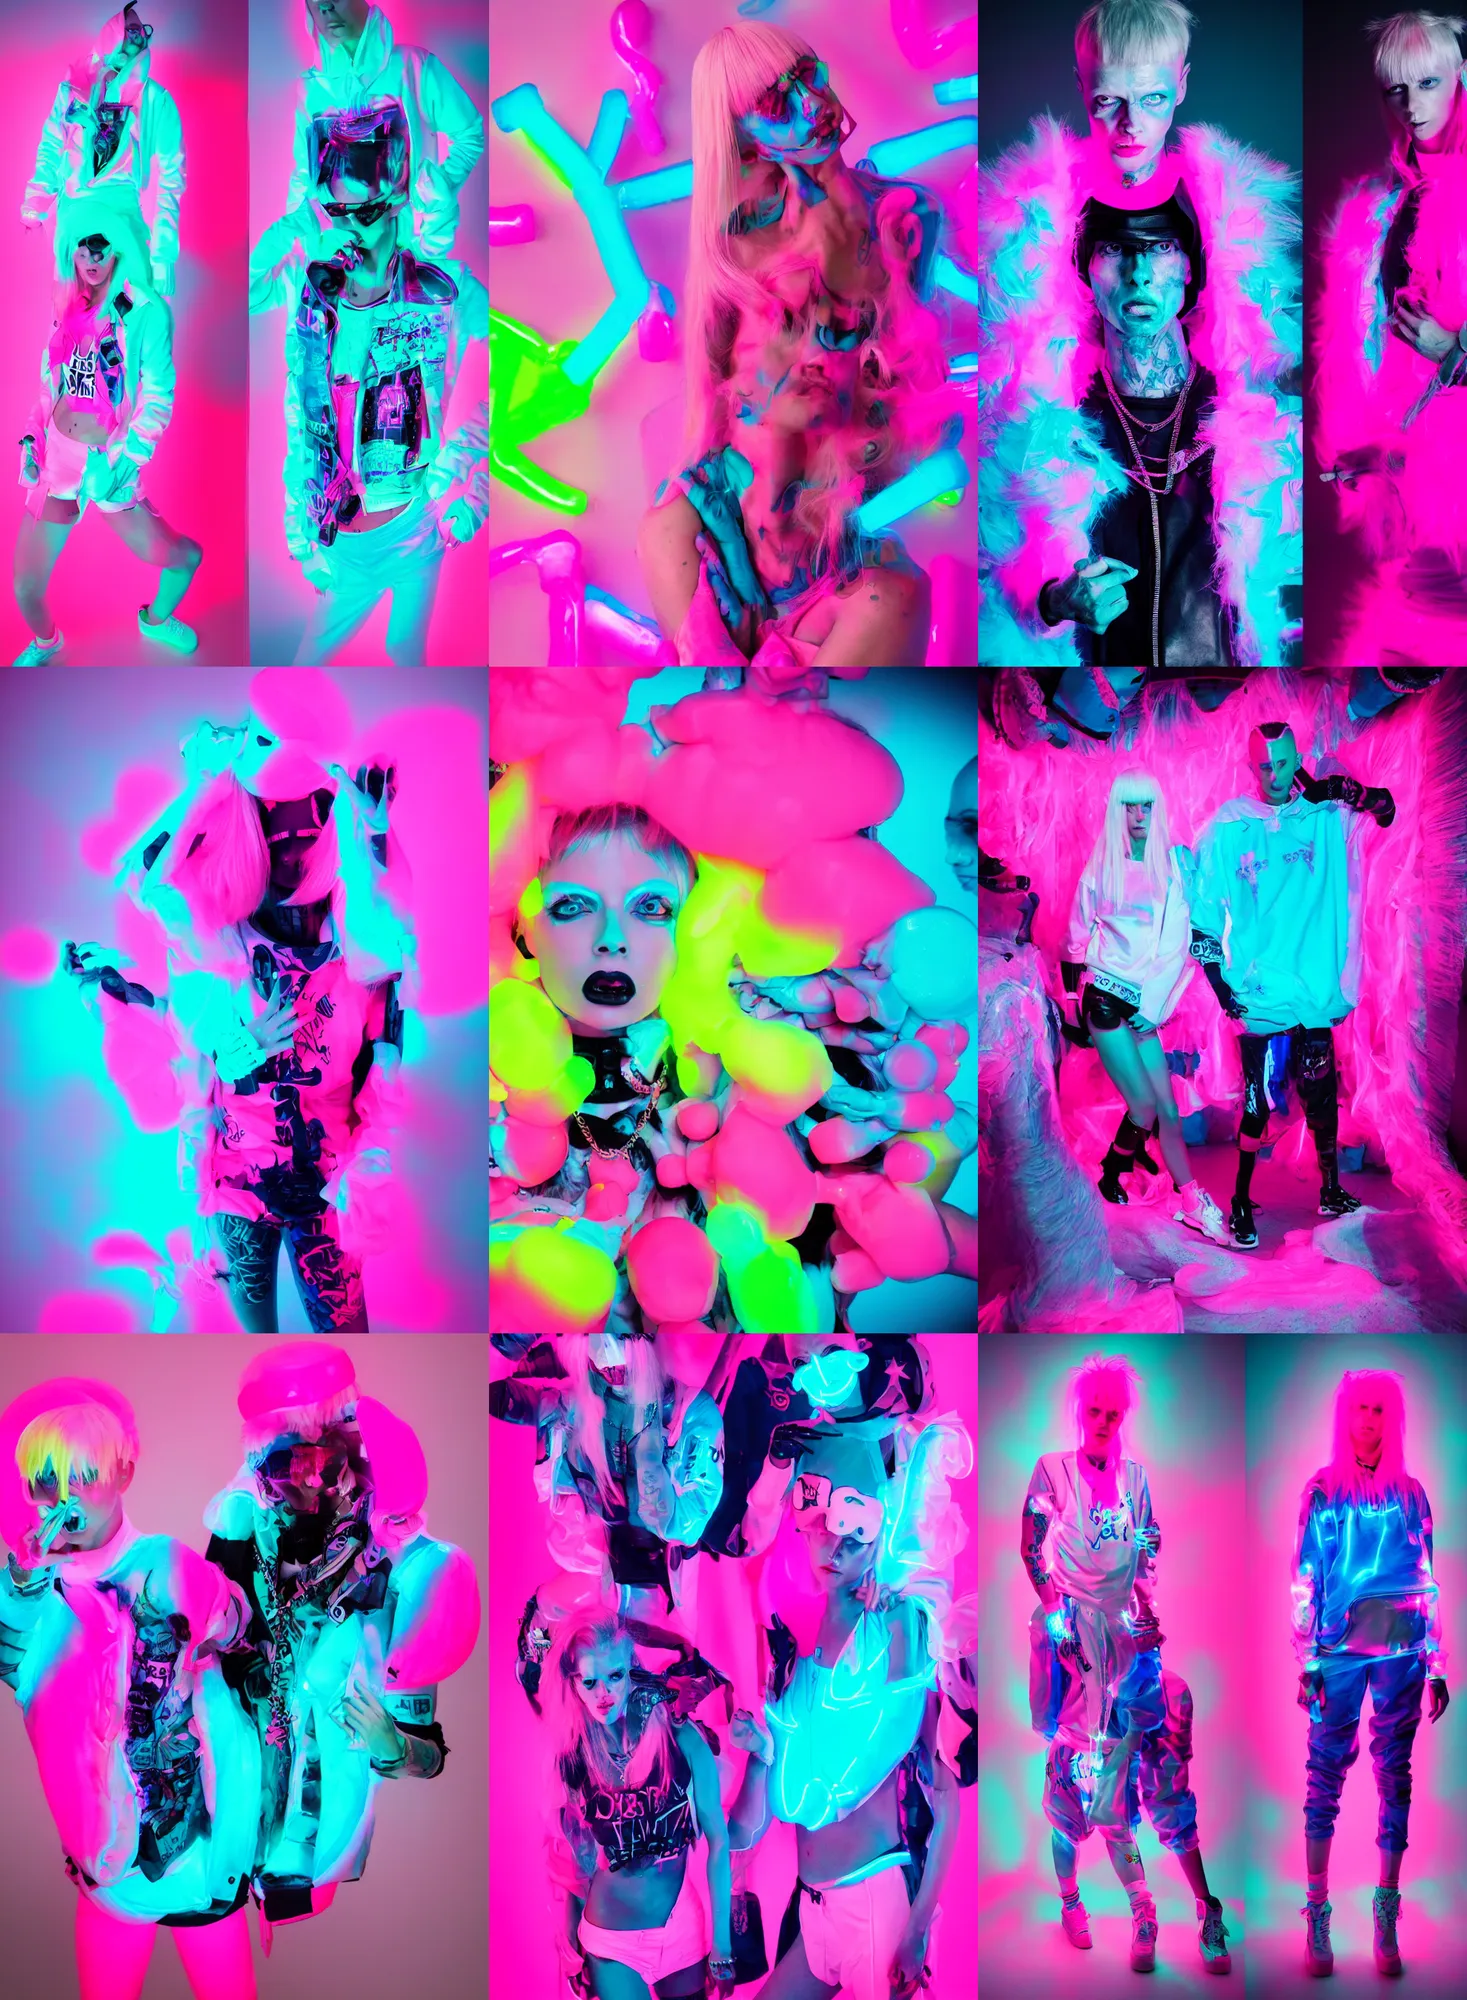 Prompt: Die Antwoord style wear, bubble gum, neon light, balenciaga fashion, glowing pink, vibrant blue, fashion studio lighting, cinematic, high realistic